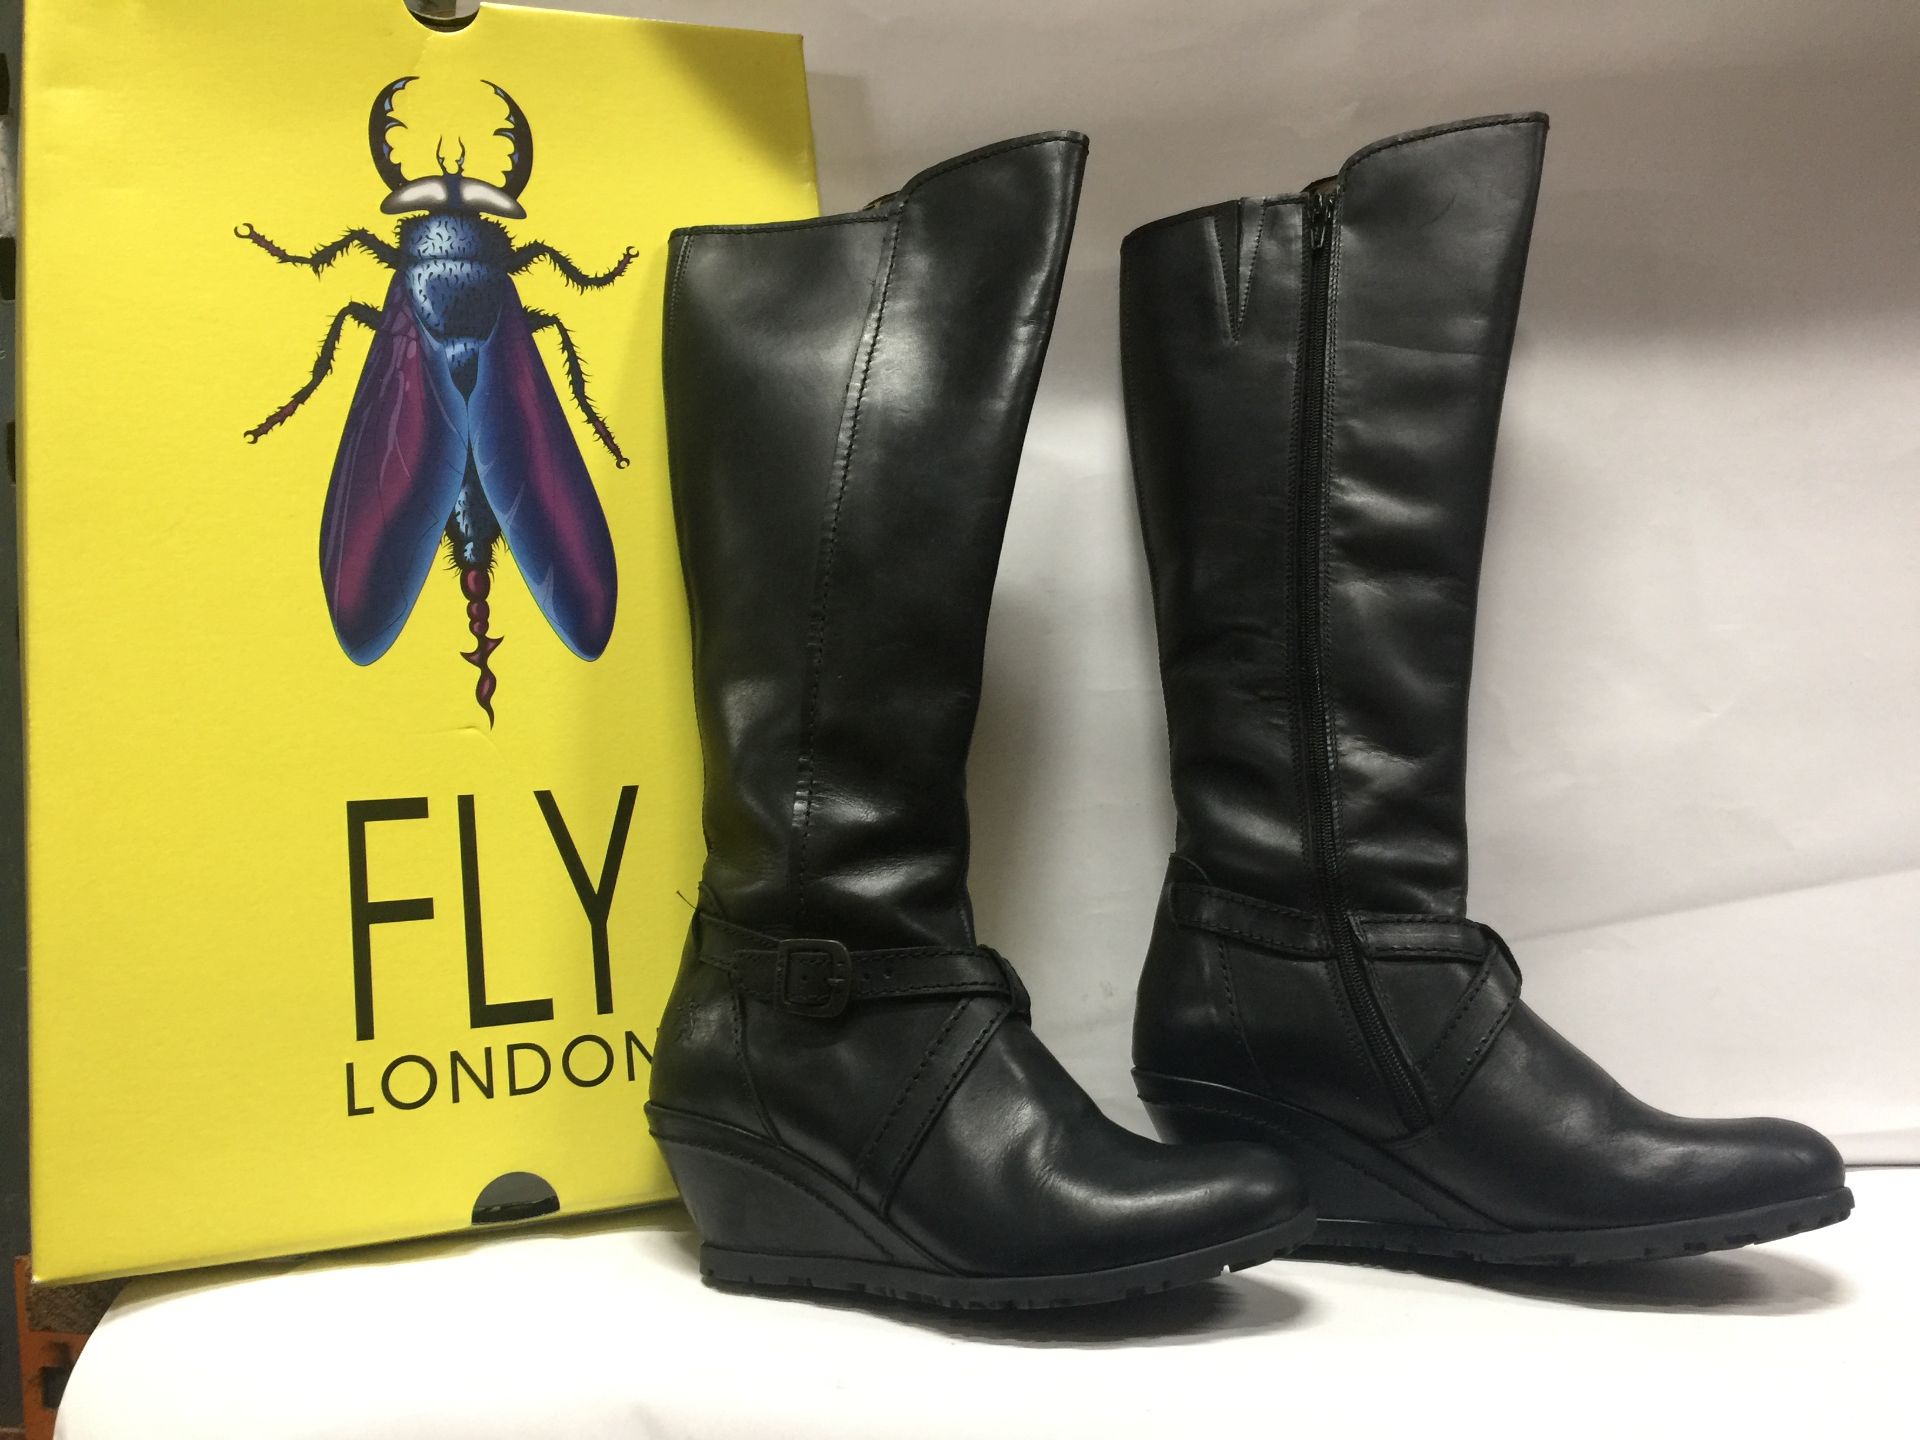 5 x Fly London Women's Boots Mixed Sizes, Styles and Colours Size Ranging EU 37 - EU 39 - Customer R - Image 2 of 4